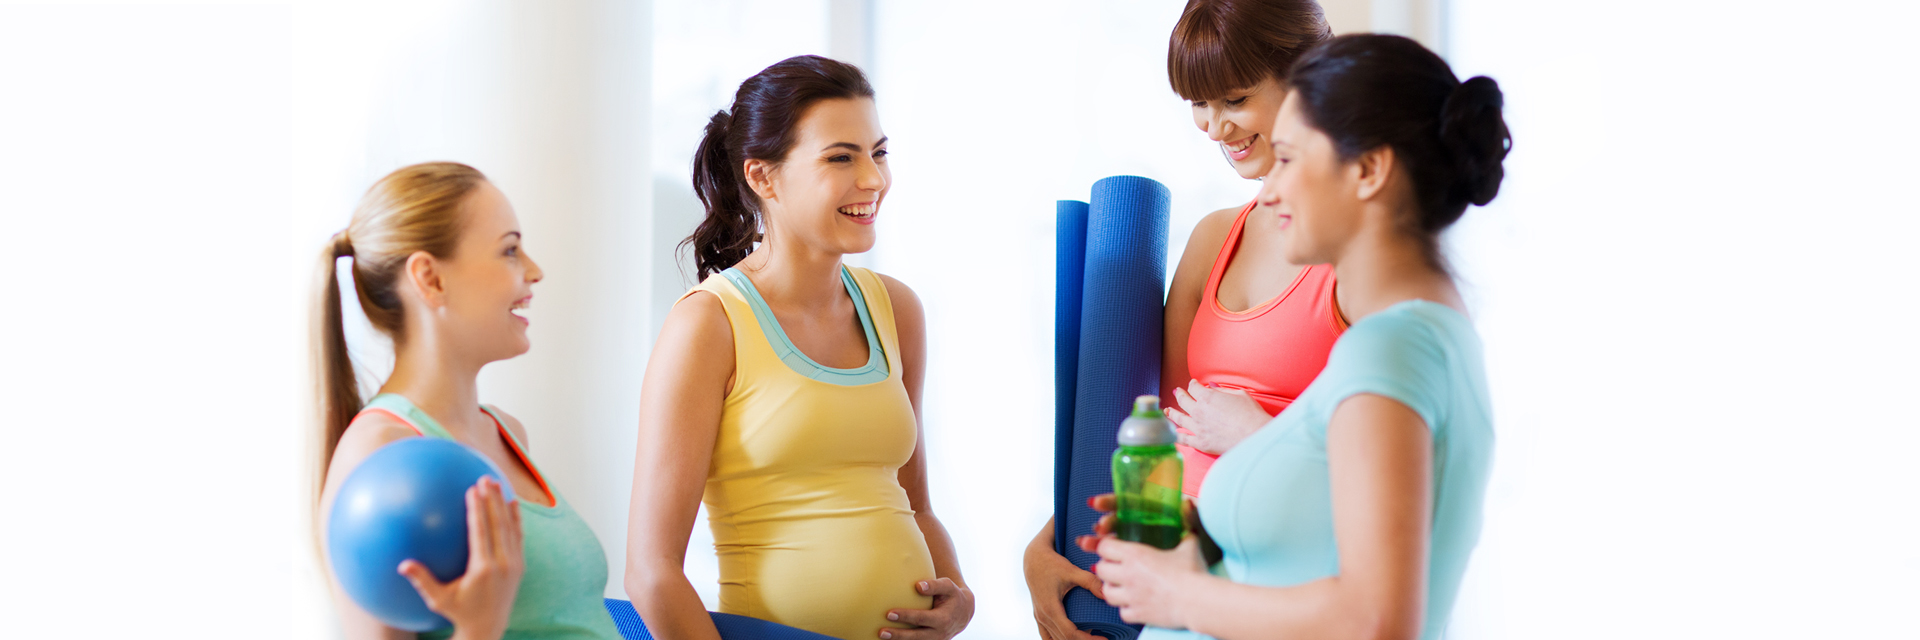 Pregnant women with yoga mats in class